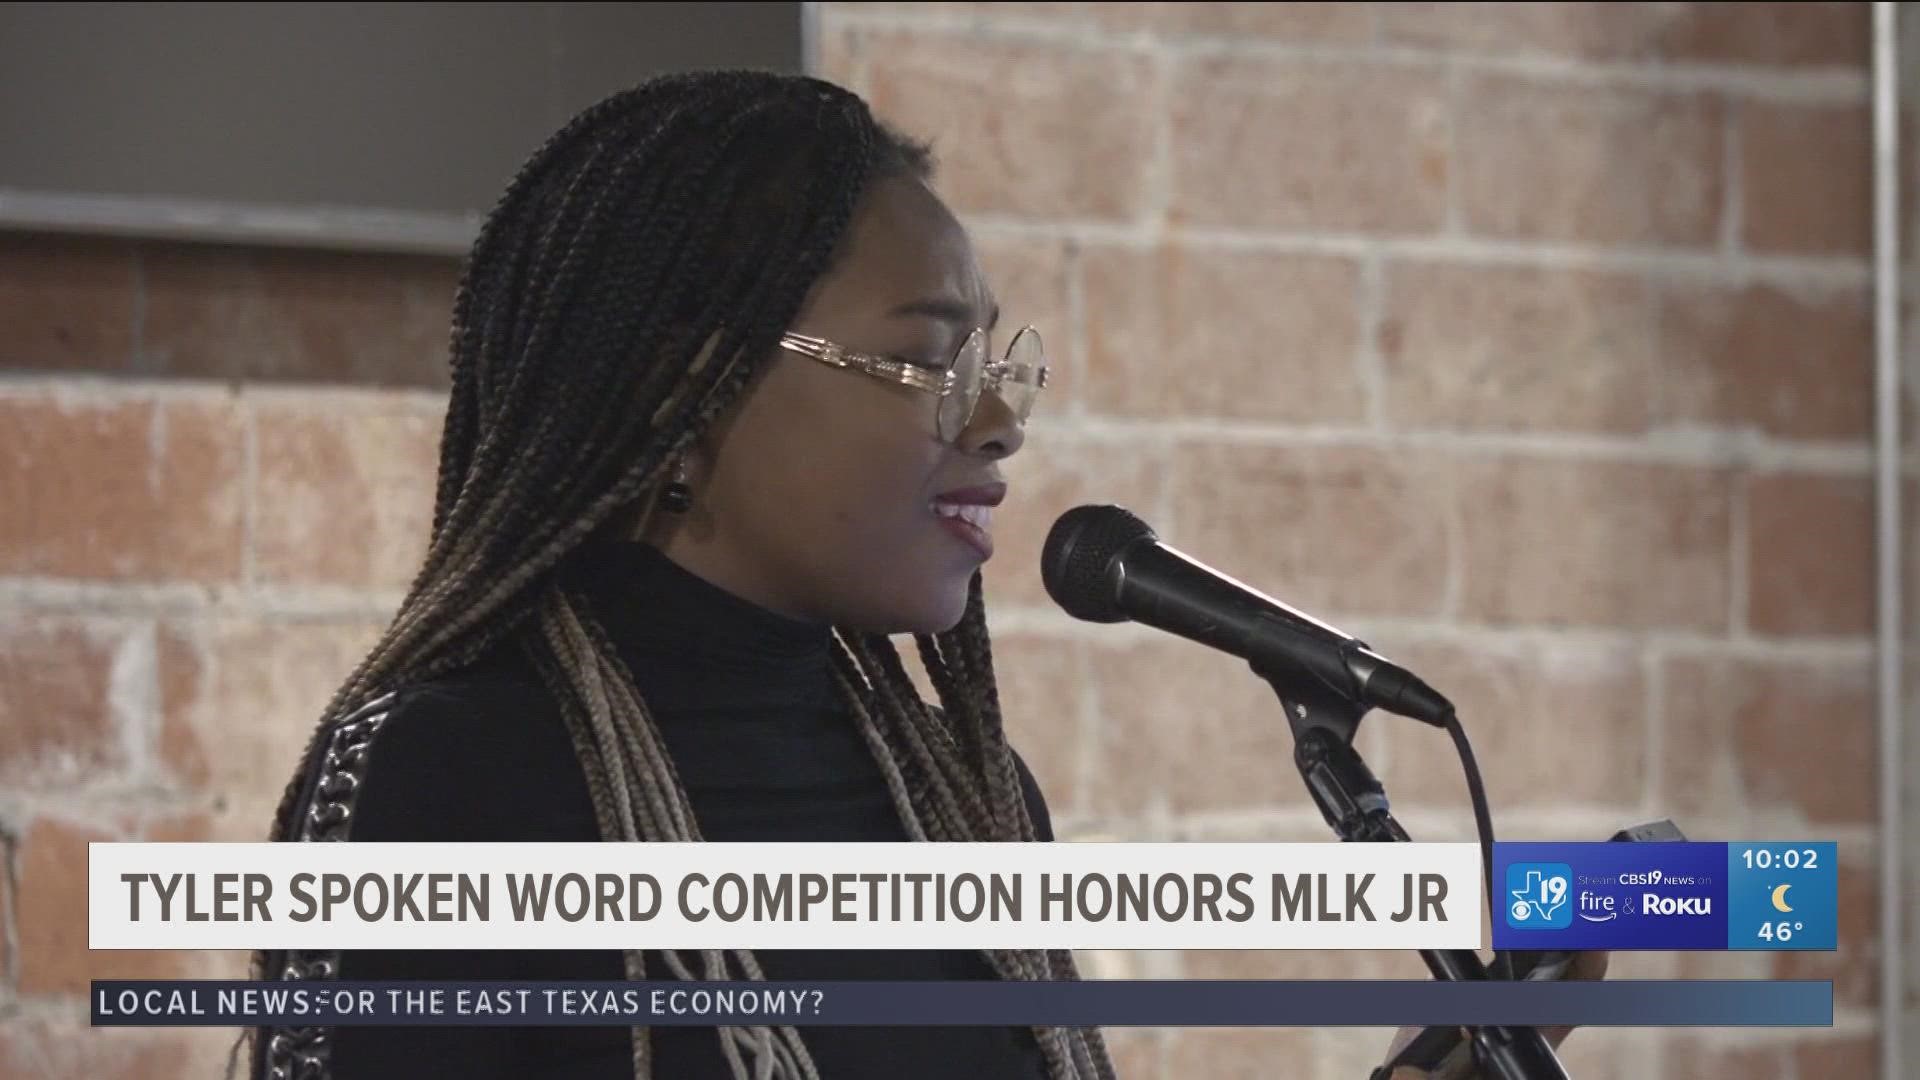 Tyler spoken word competition honors Martin Luther King Jr.